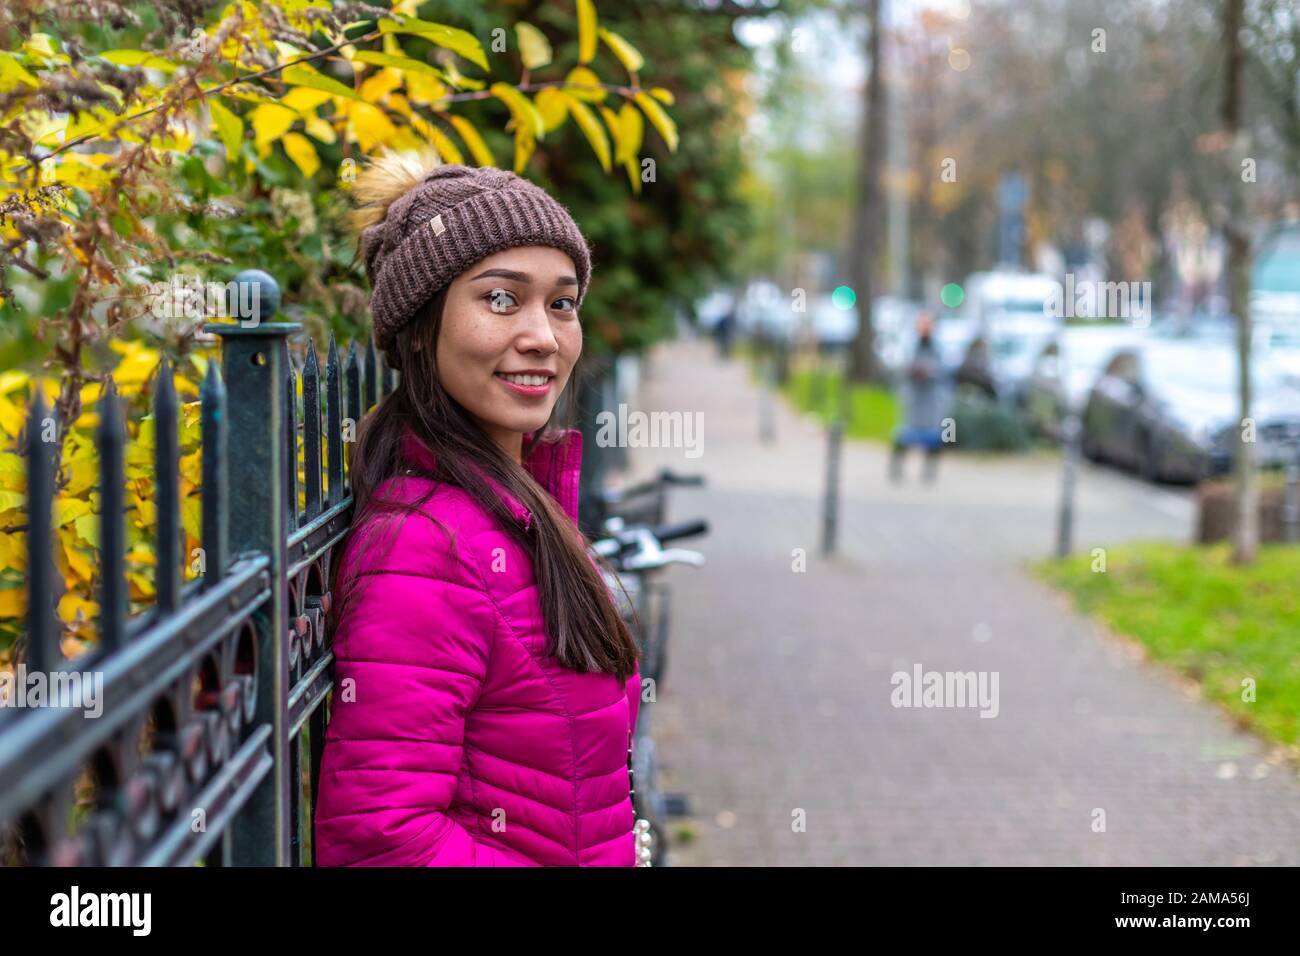 Asian girl with freckles and unusual appearance. Attractive girl in a pink jacket and Knitted hat. Blurred background with bokeh. Stock Photo